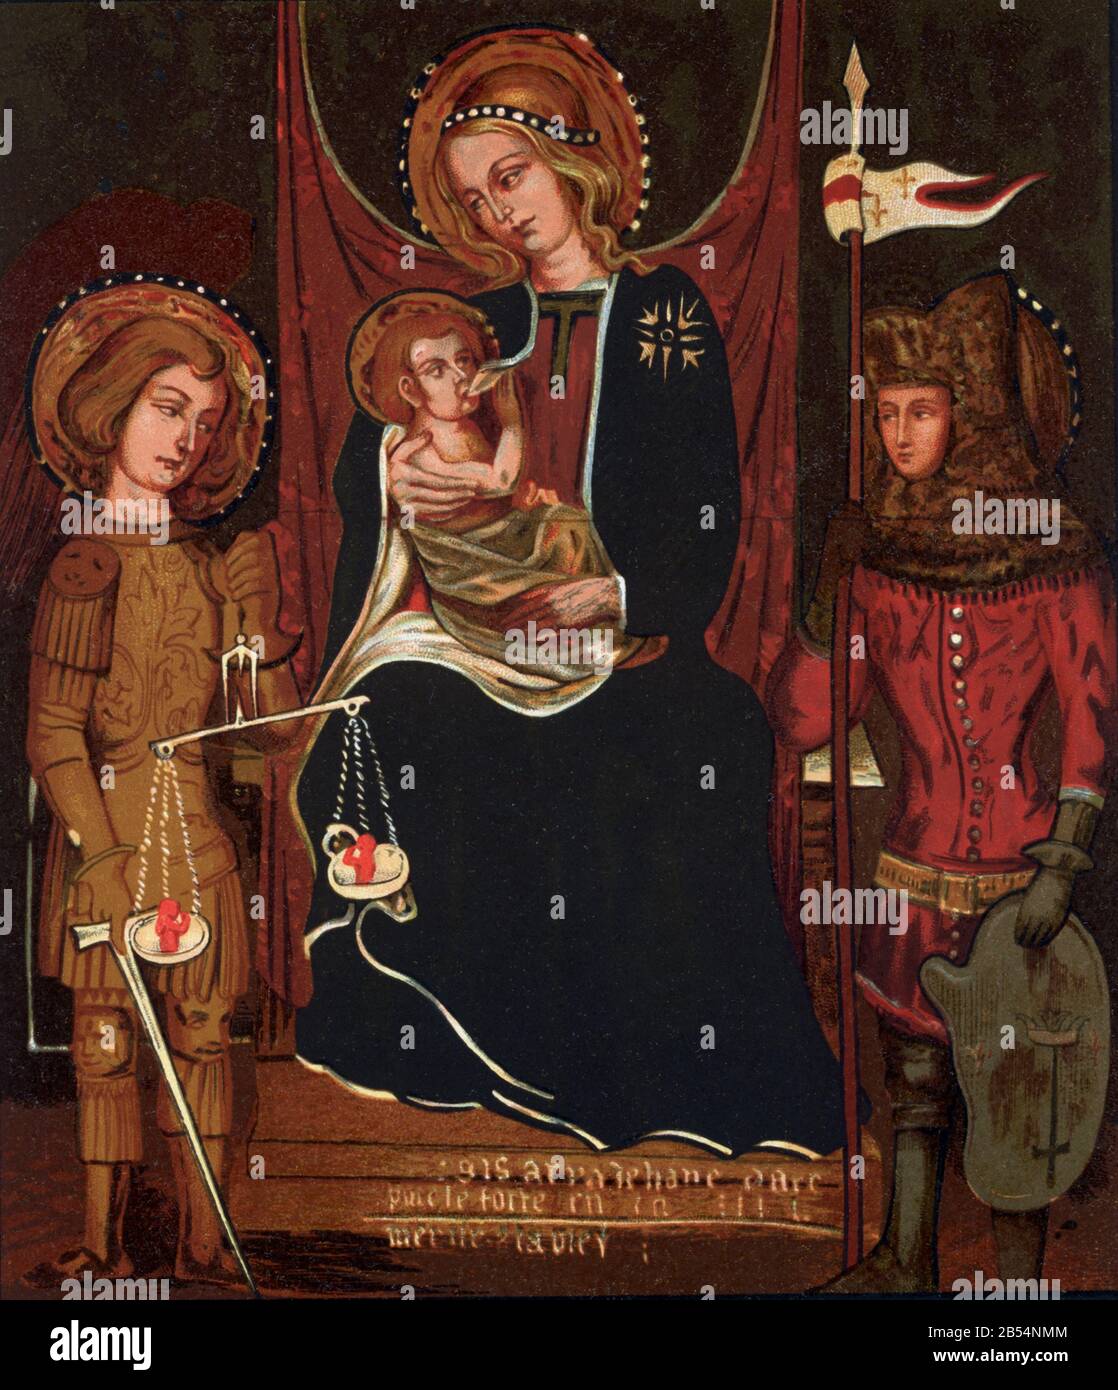 . The Virgin Mary, with the infant Jesus, St Michael and Joan of Arc. Painted with egg tempera  in the time of Joan and  recently restored by  M Auvray, in Paris. St Michael holds a scale in which he weighs the souls,  Joan holds her standard in one hand, and in the other her armor. Just as the Virgin, the infant Jesus, and St Michael, she has a halo, an attribute of sanctity. So reads the English translation of the French caption accompanying this image. Stock Photo